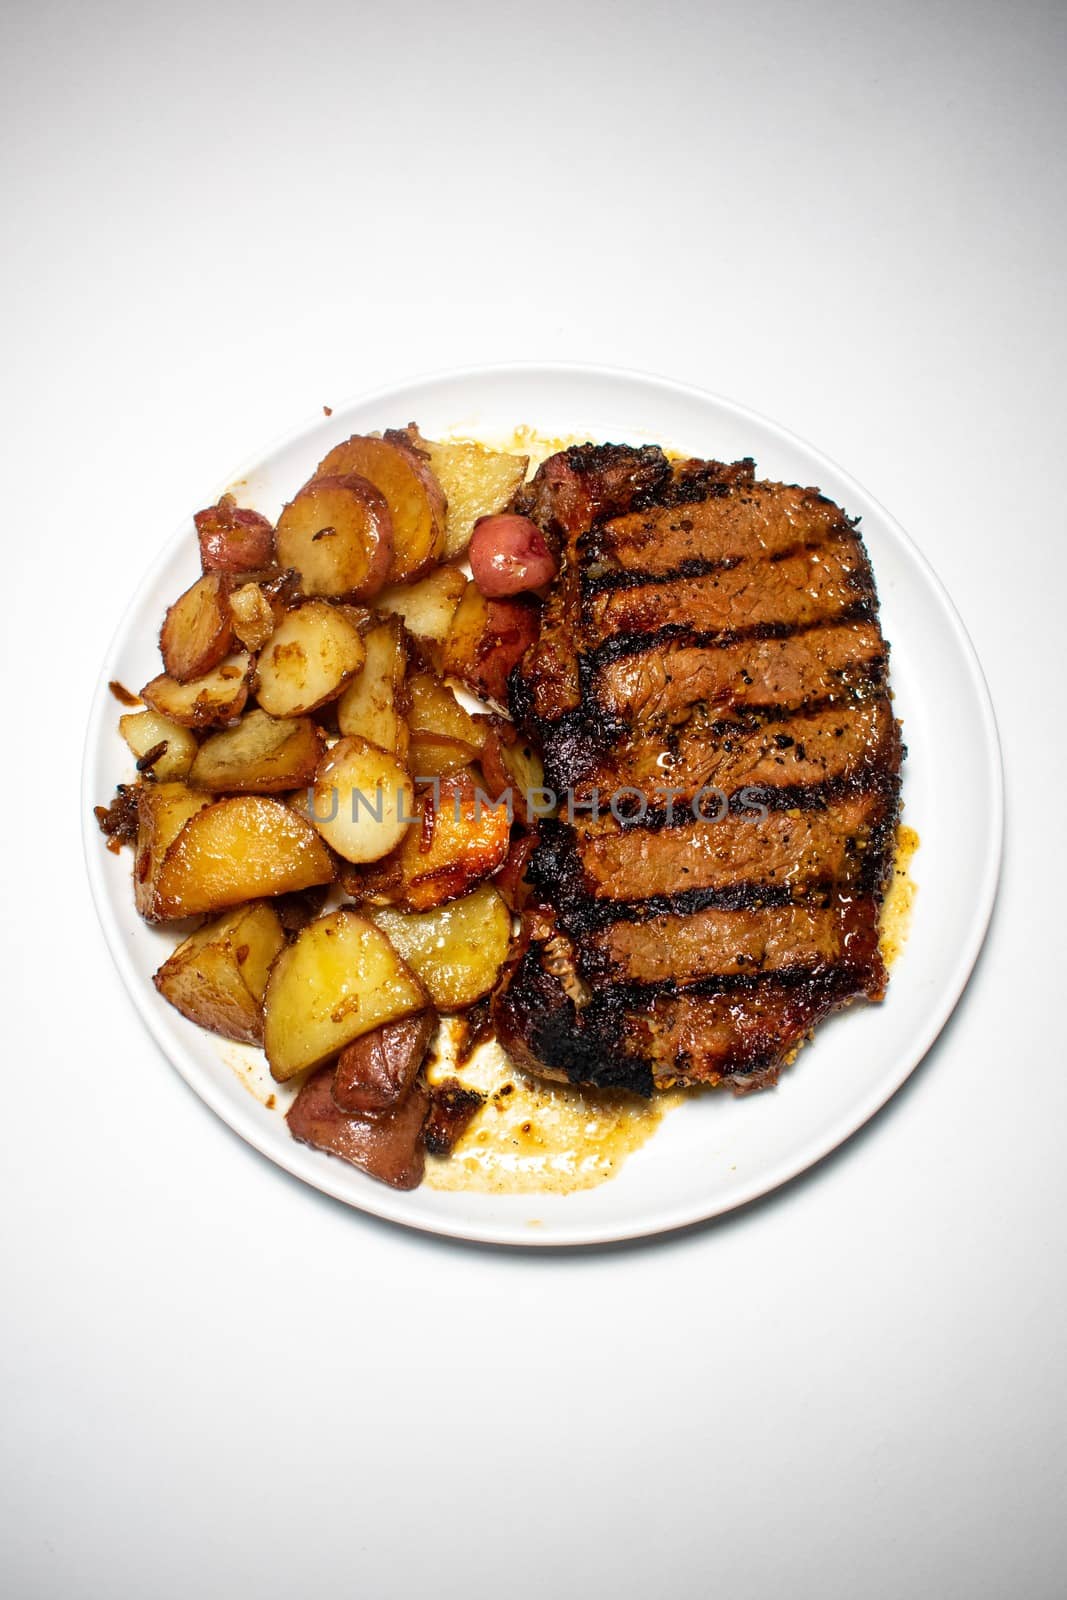 A Grilled Steak With Grill Lines and Potatoes Plated on a Pure W by bju12290